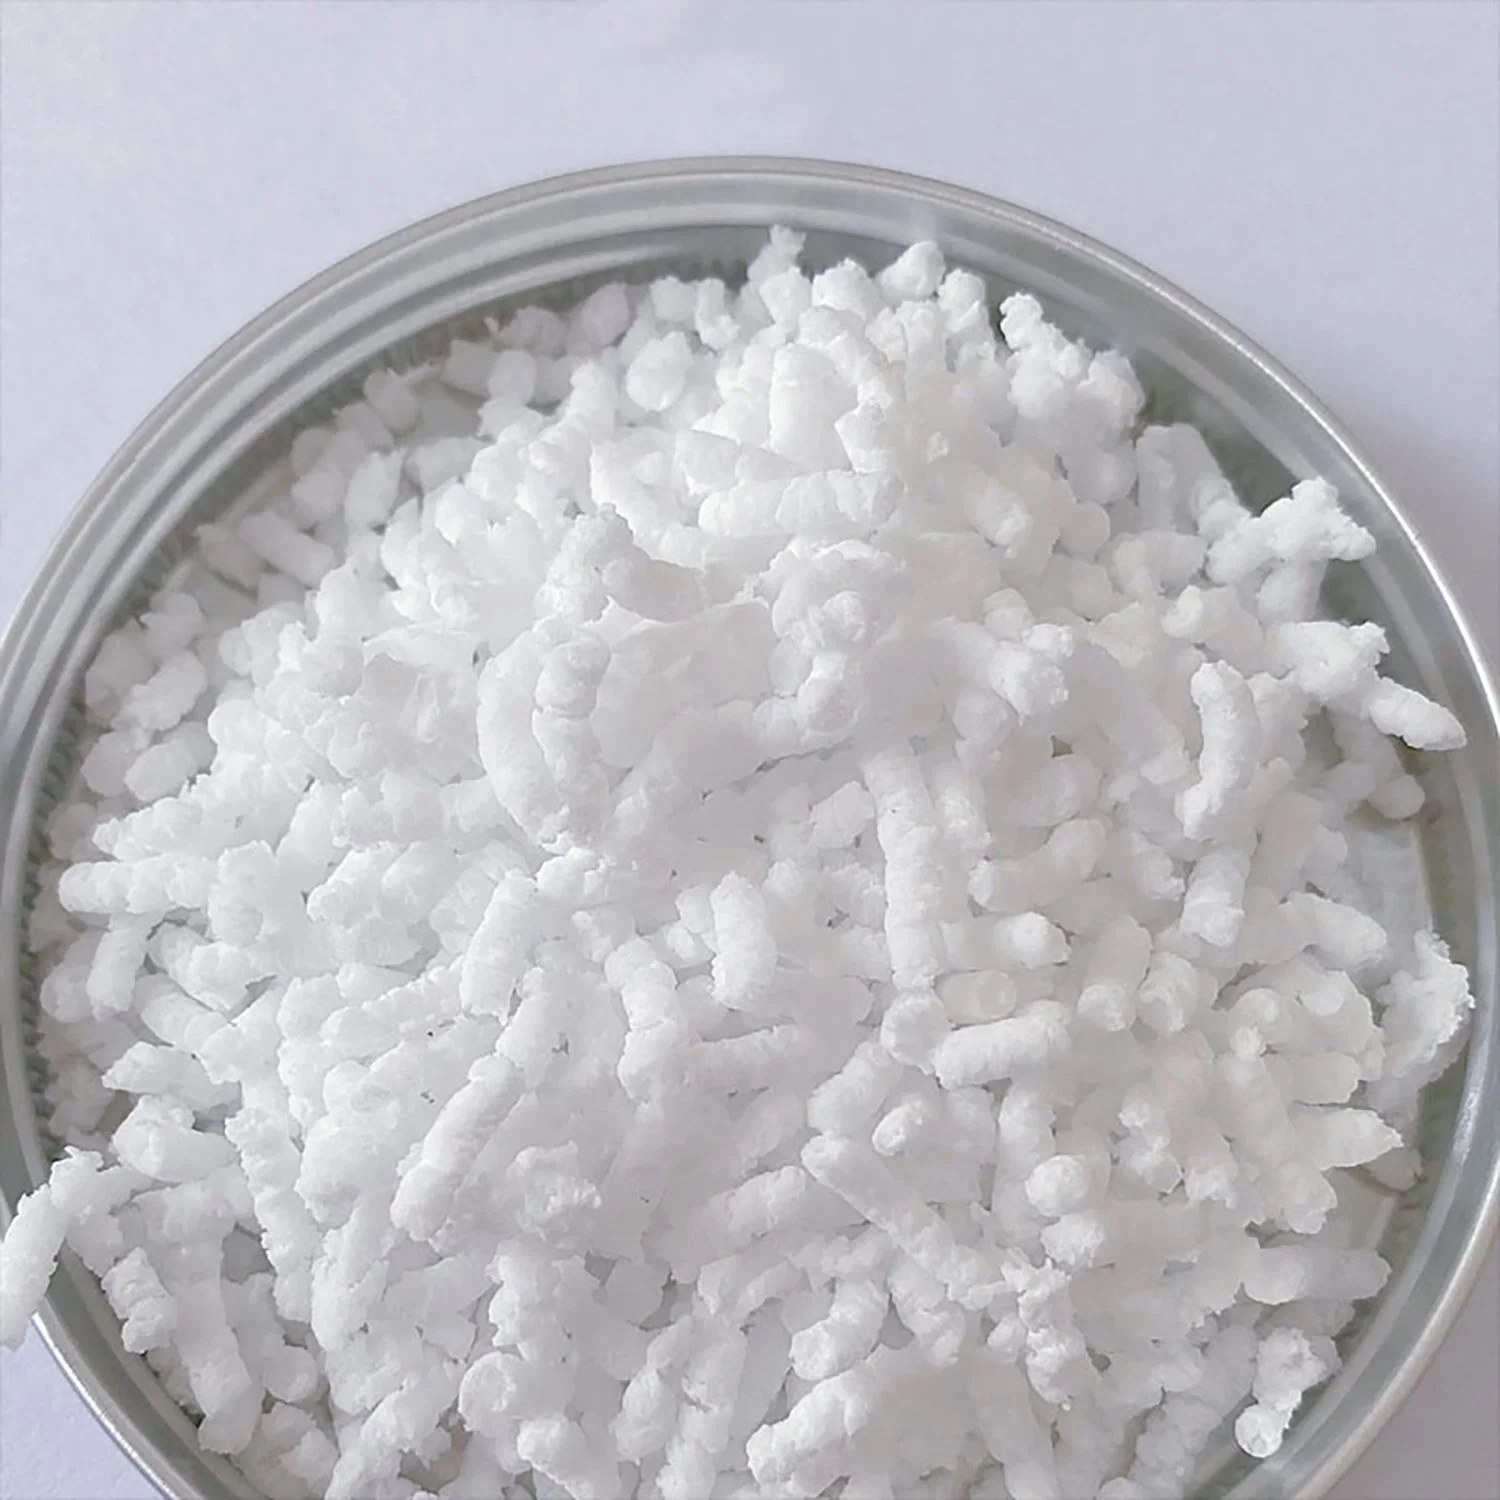 Sbs Thermoplastic Elastomer Lcy 3546 Thermoplastic Styrene Butadiene Rubber for Plastic Modification